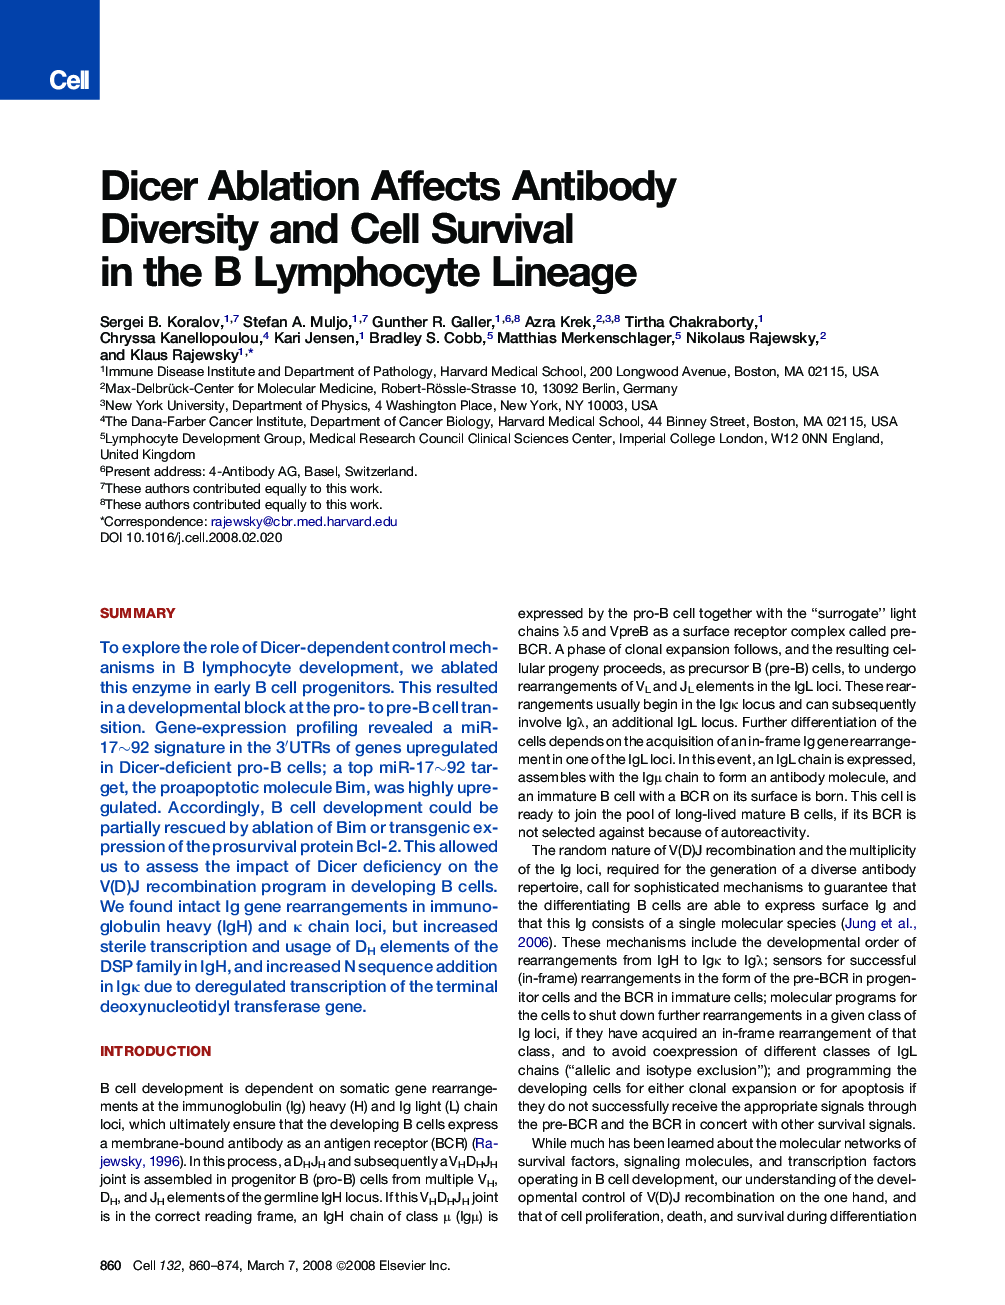 Dicer Ablation Affects Antibody Diversity and Cell Survival in the B Lymphocyte Lineage